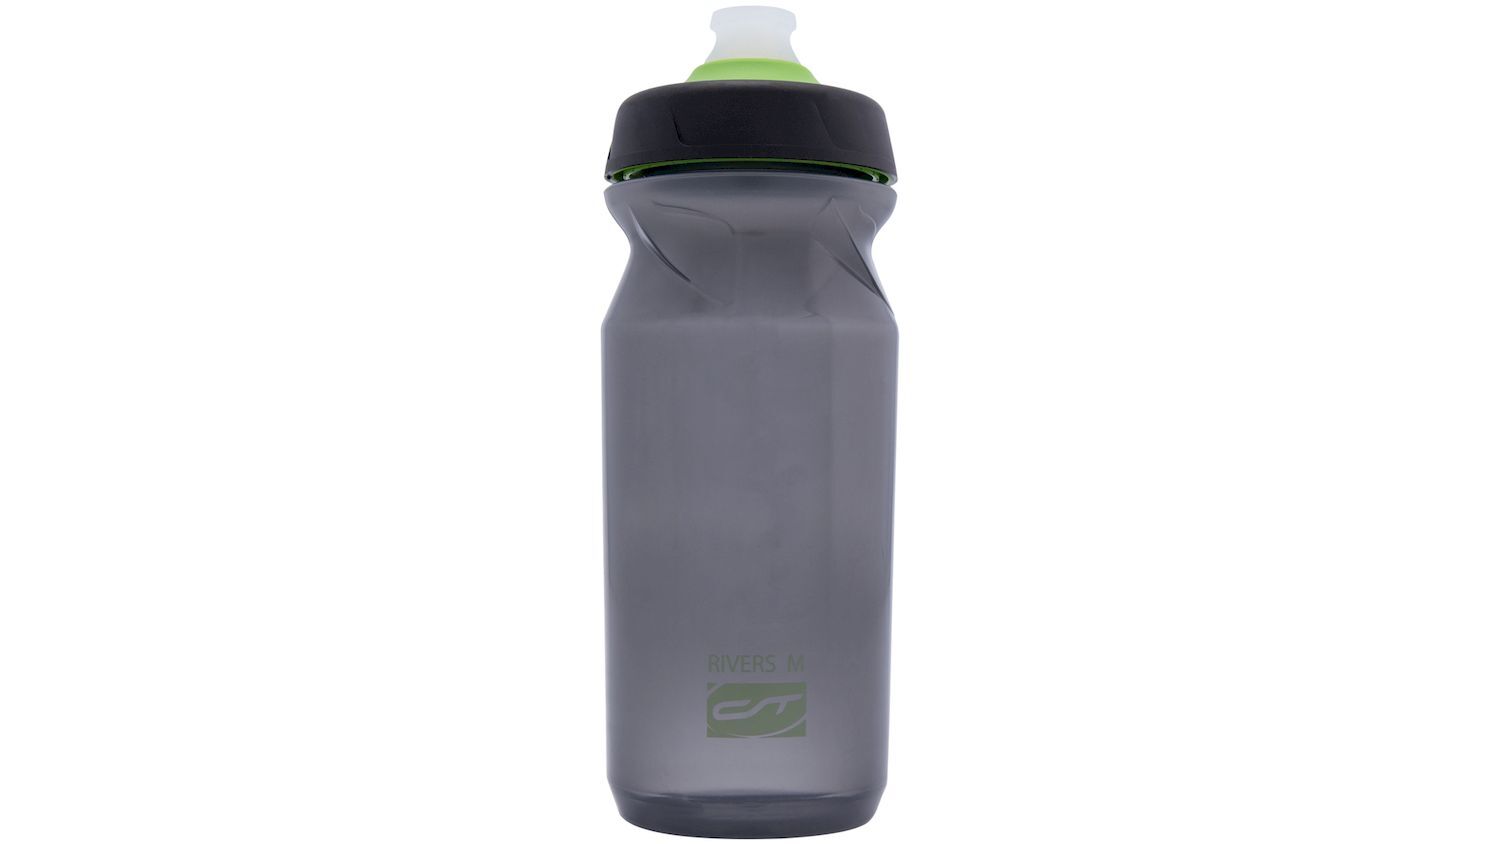 Contec Rivers M - Cycling water bottle